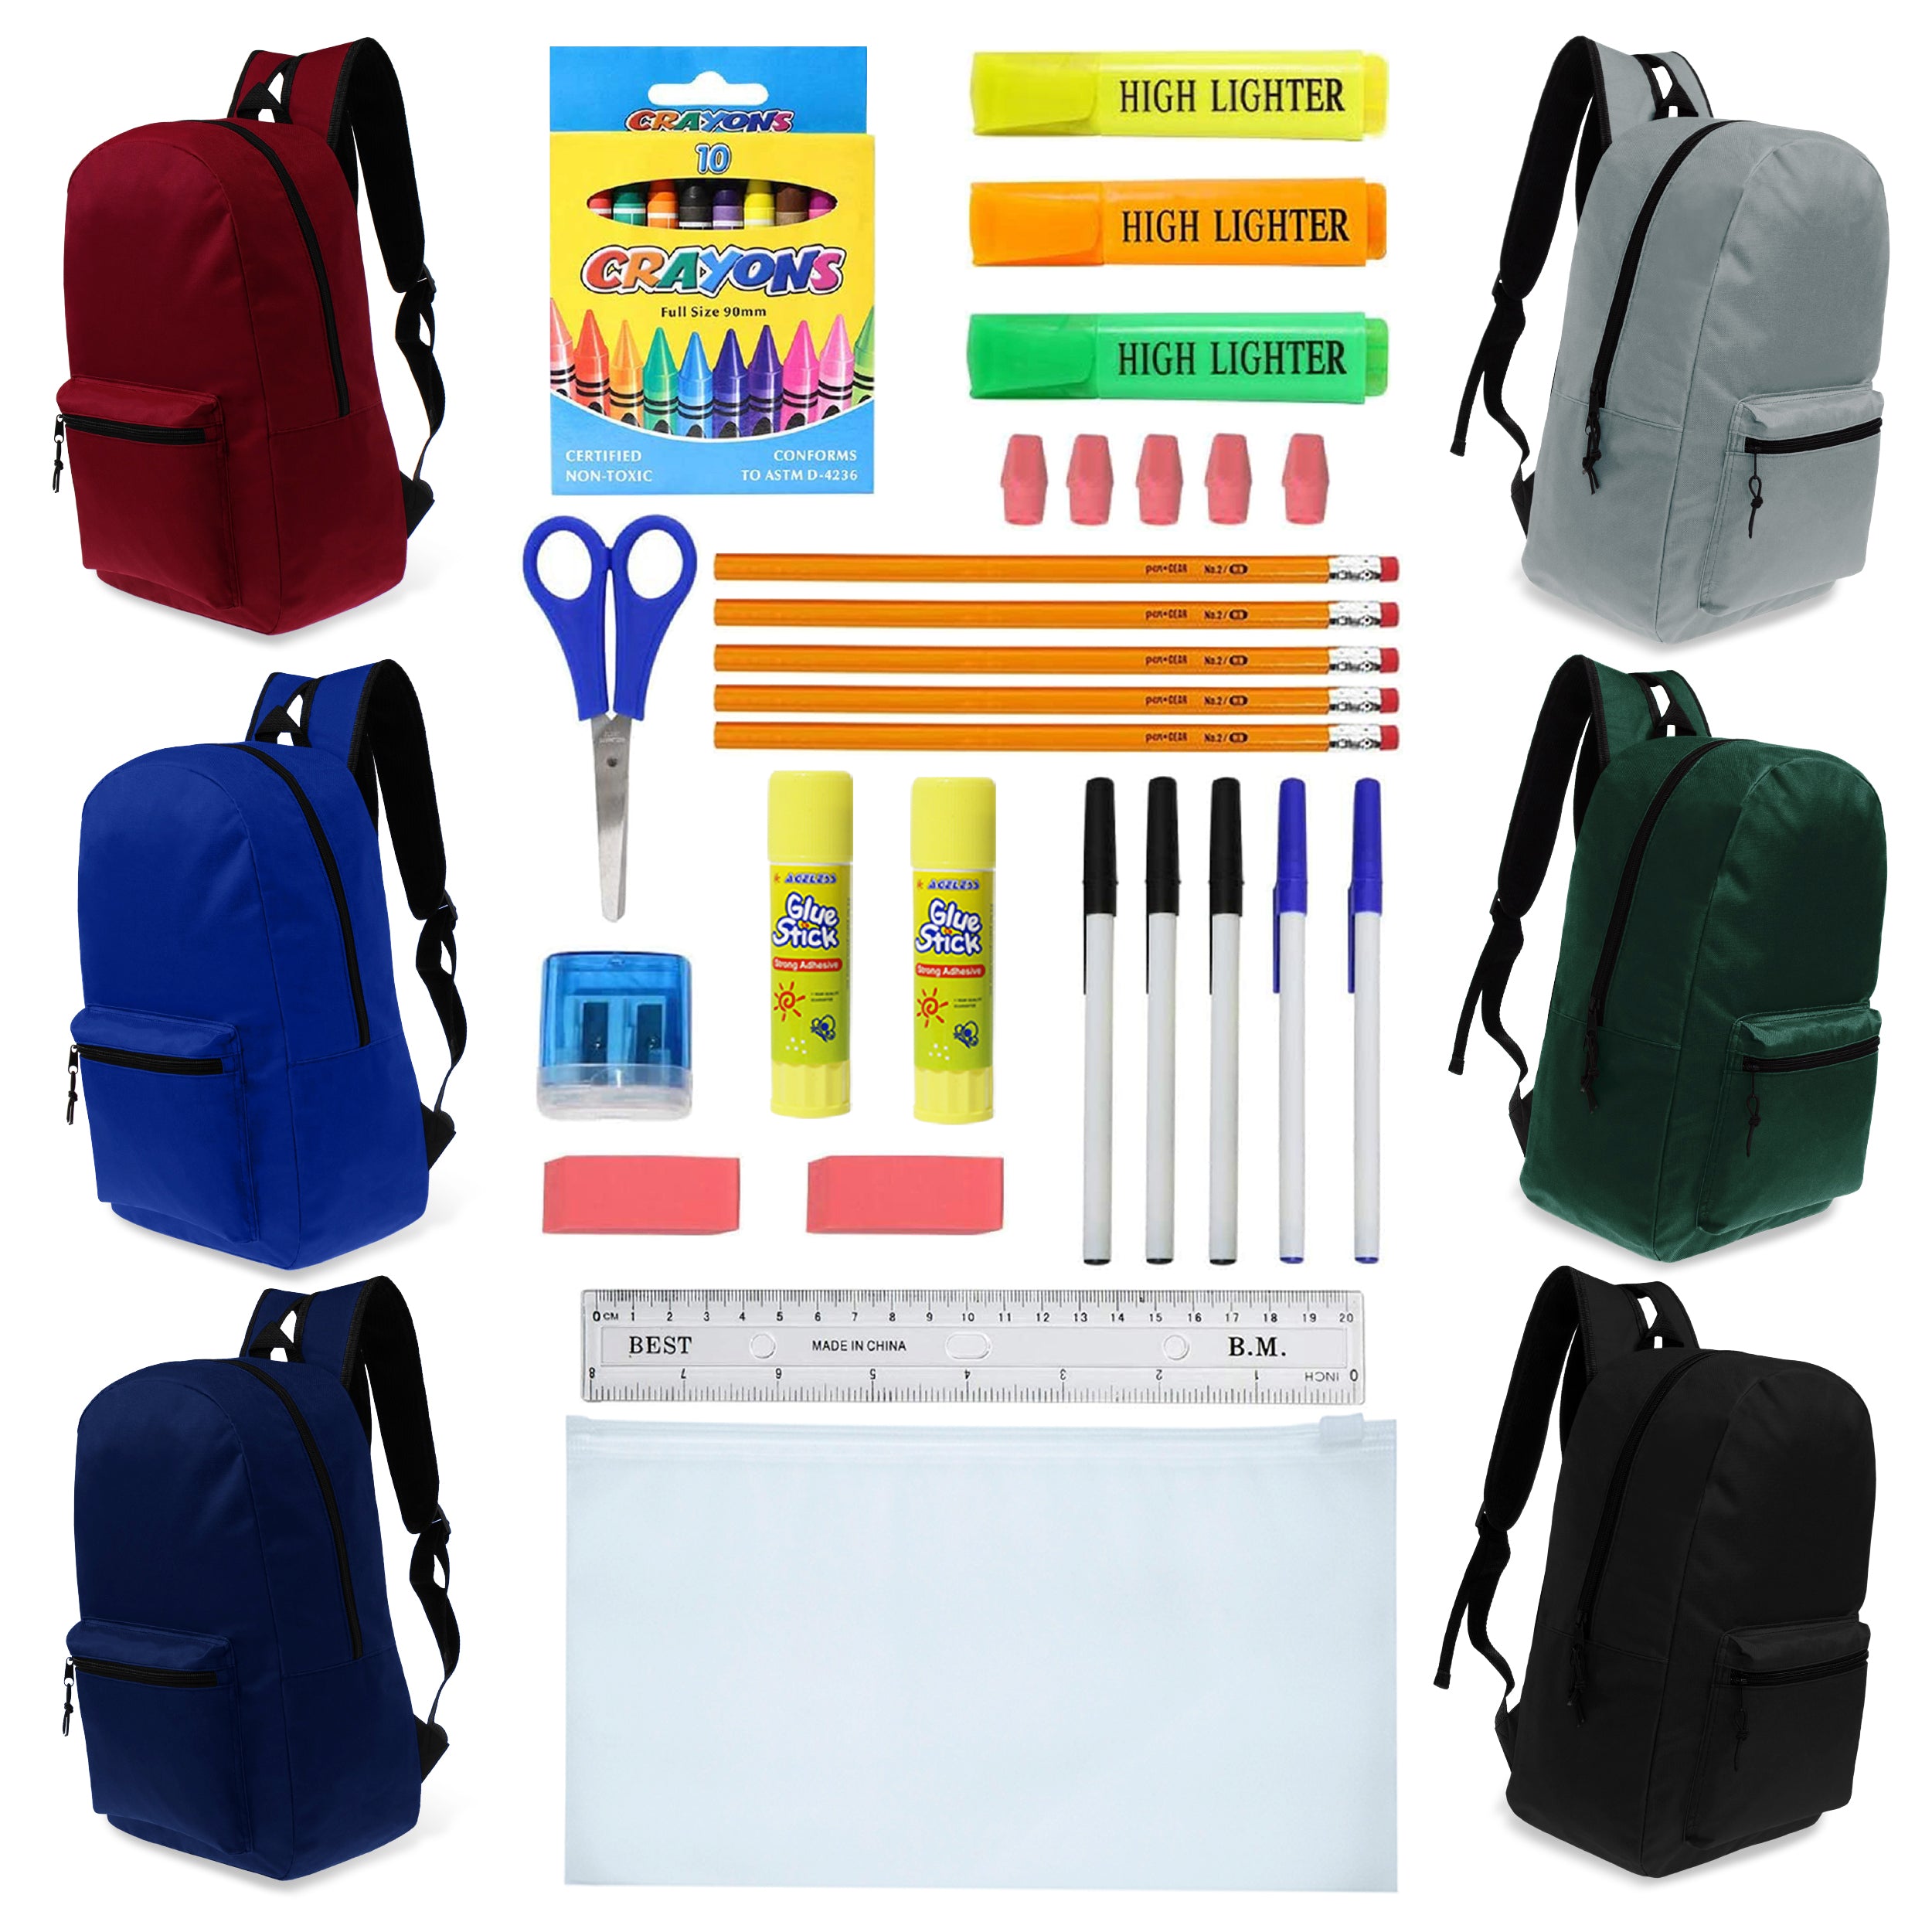 19 Inch Bulk Backpacks in Assorted Colors with School Supply Kits Wholesale - Kit of 12